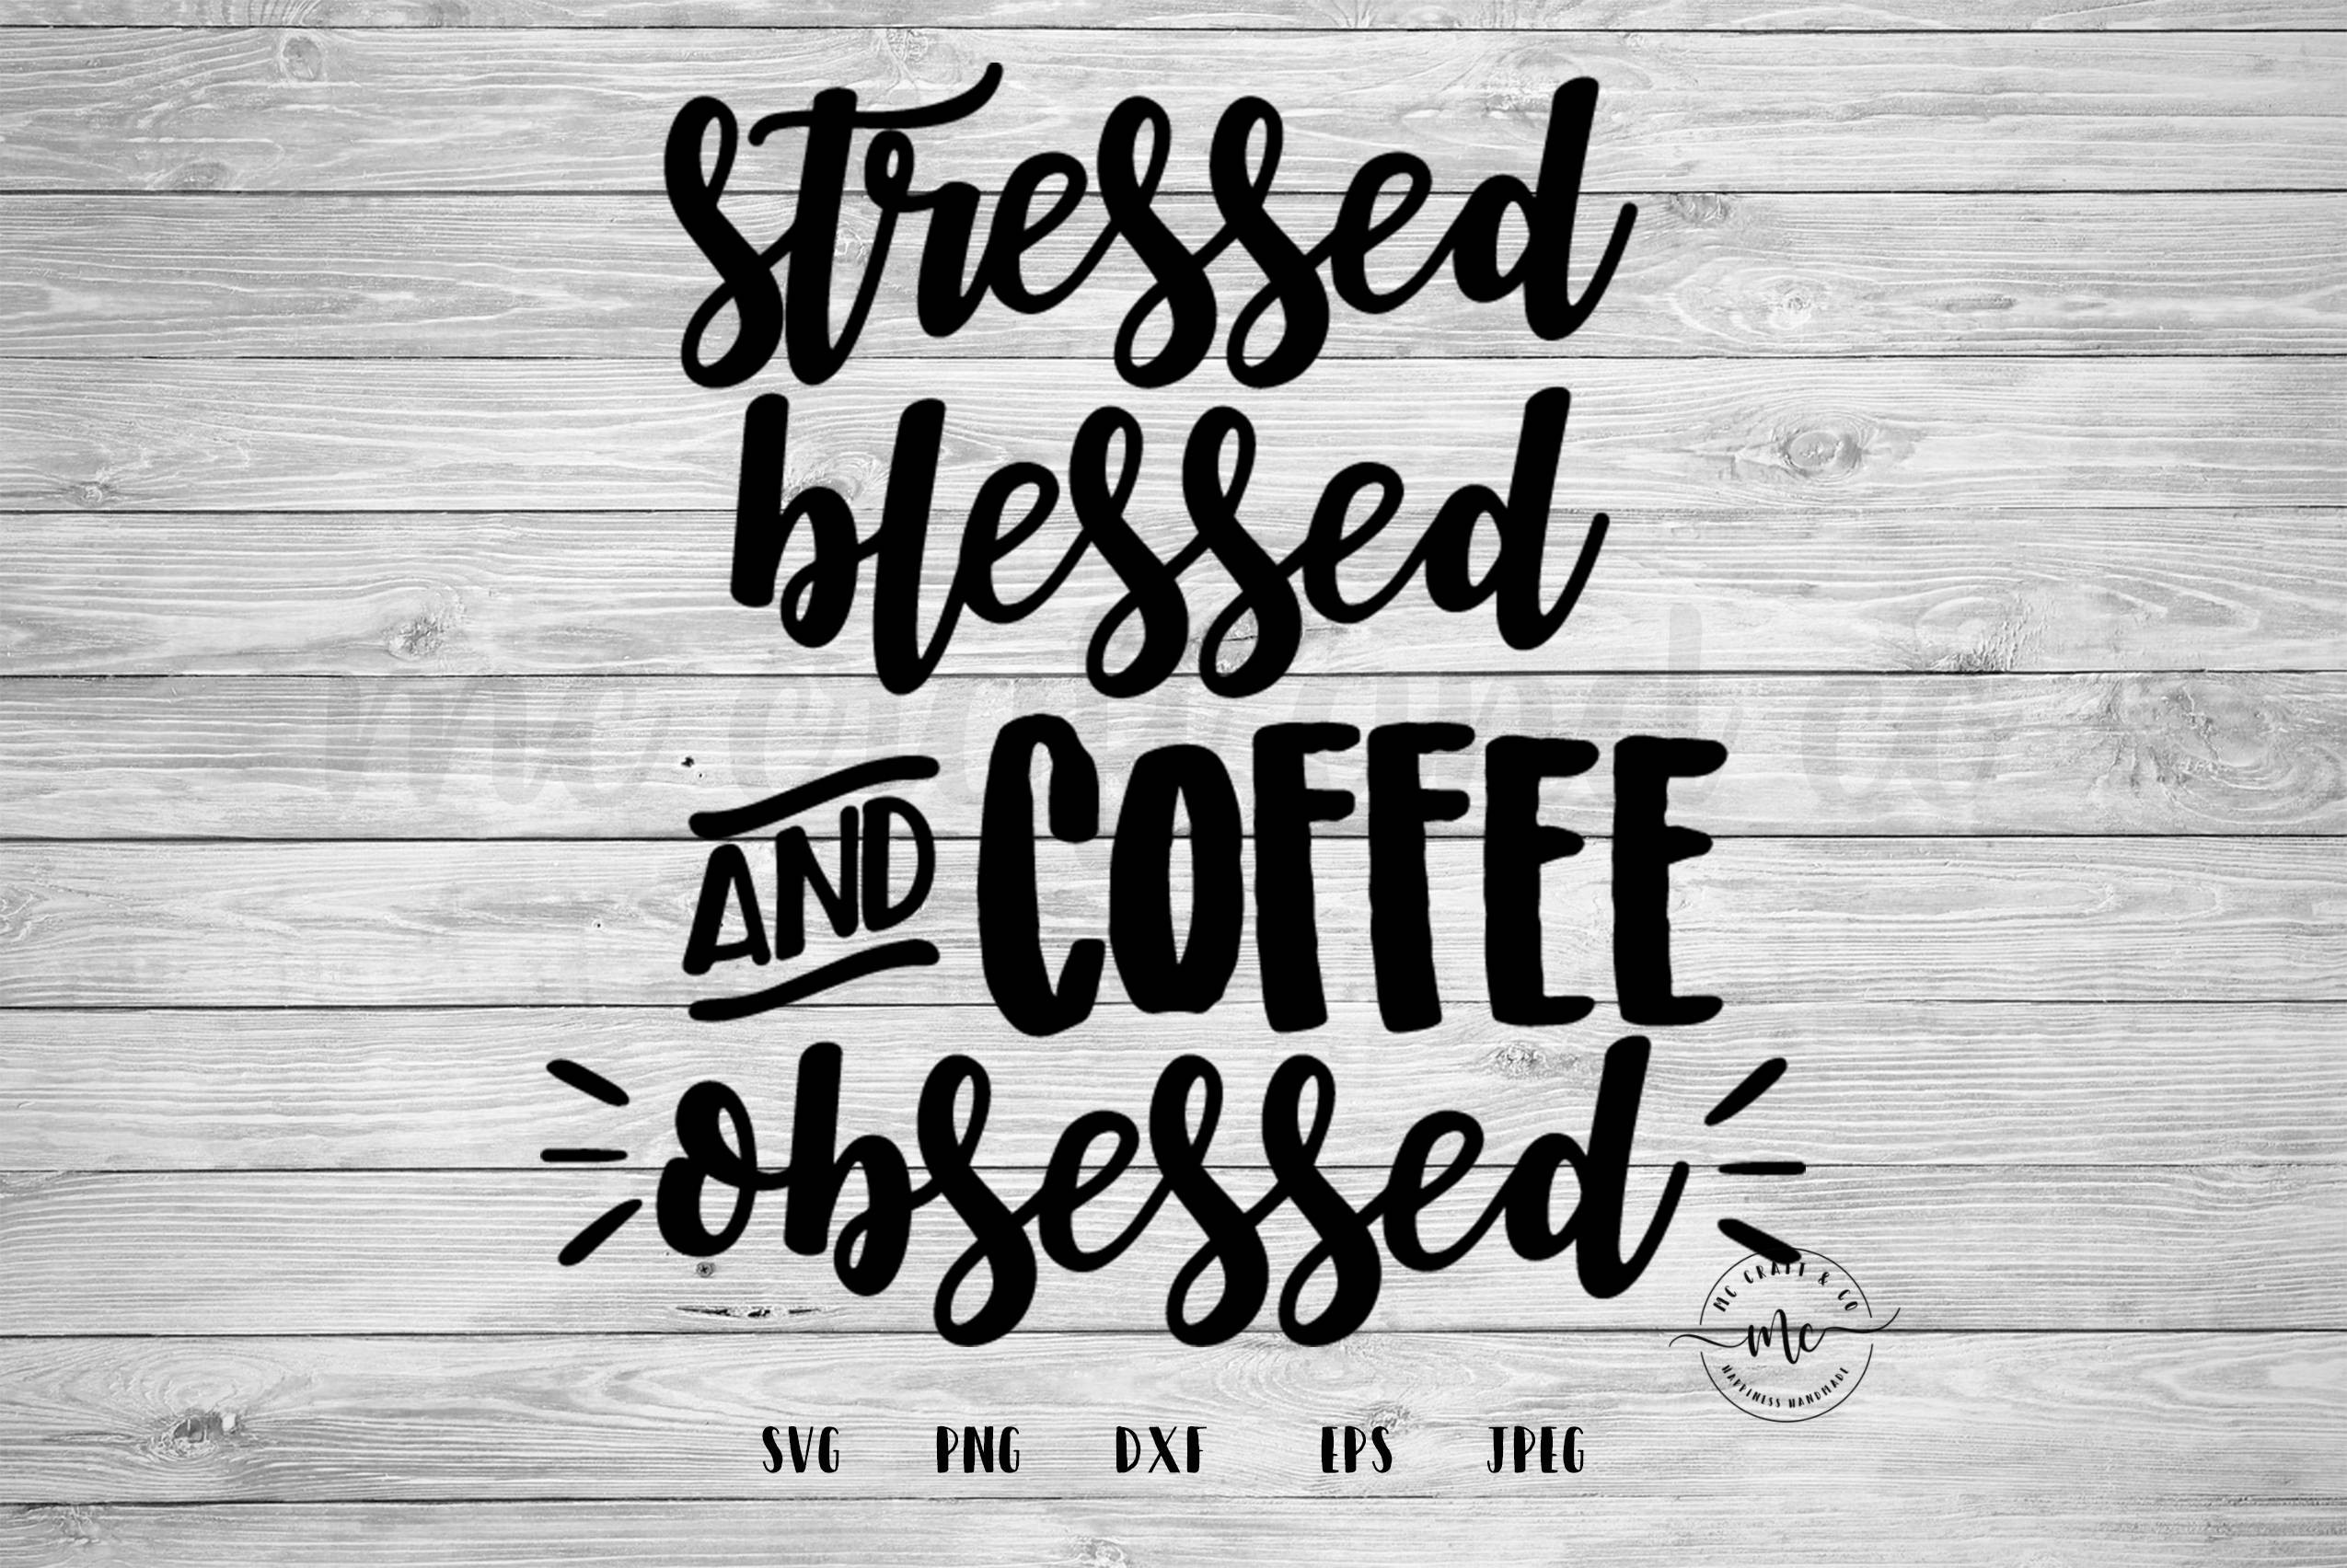 Funny Quotes About Coffee
 Stressed Blessed and Coffee Obsessed Coffee Quotes Funny